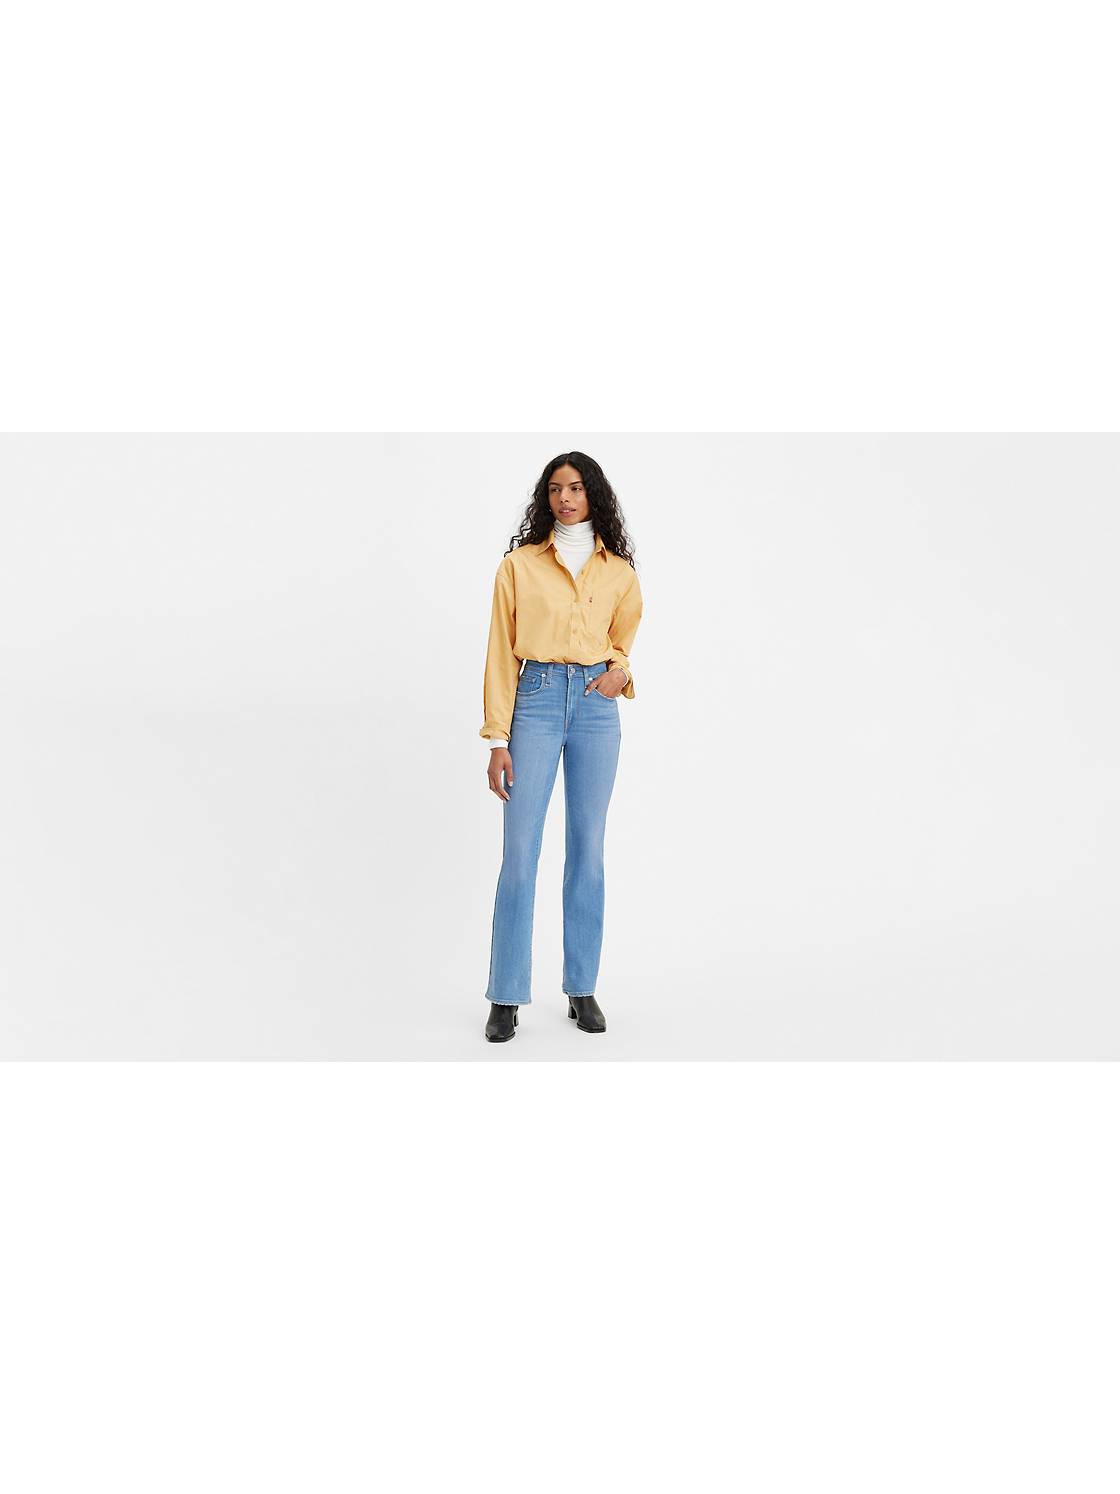 725™ High Rise Bootcut Jeans 1